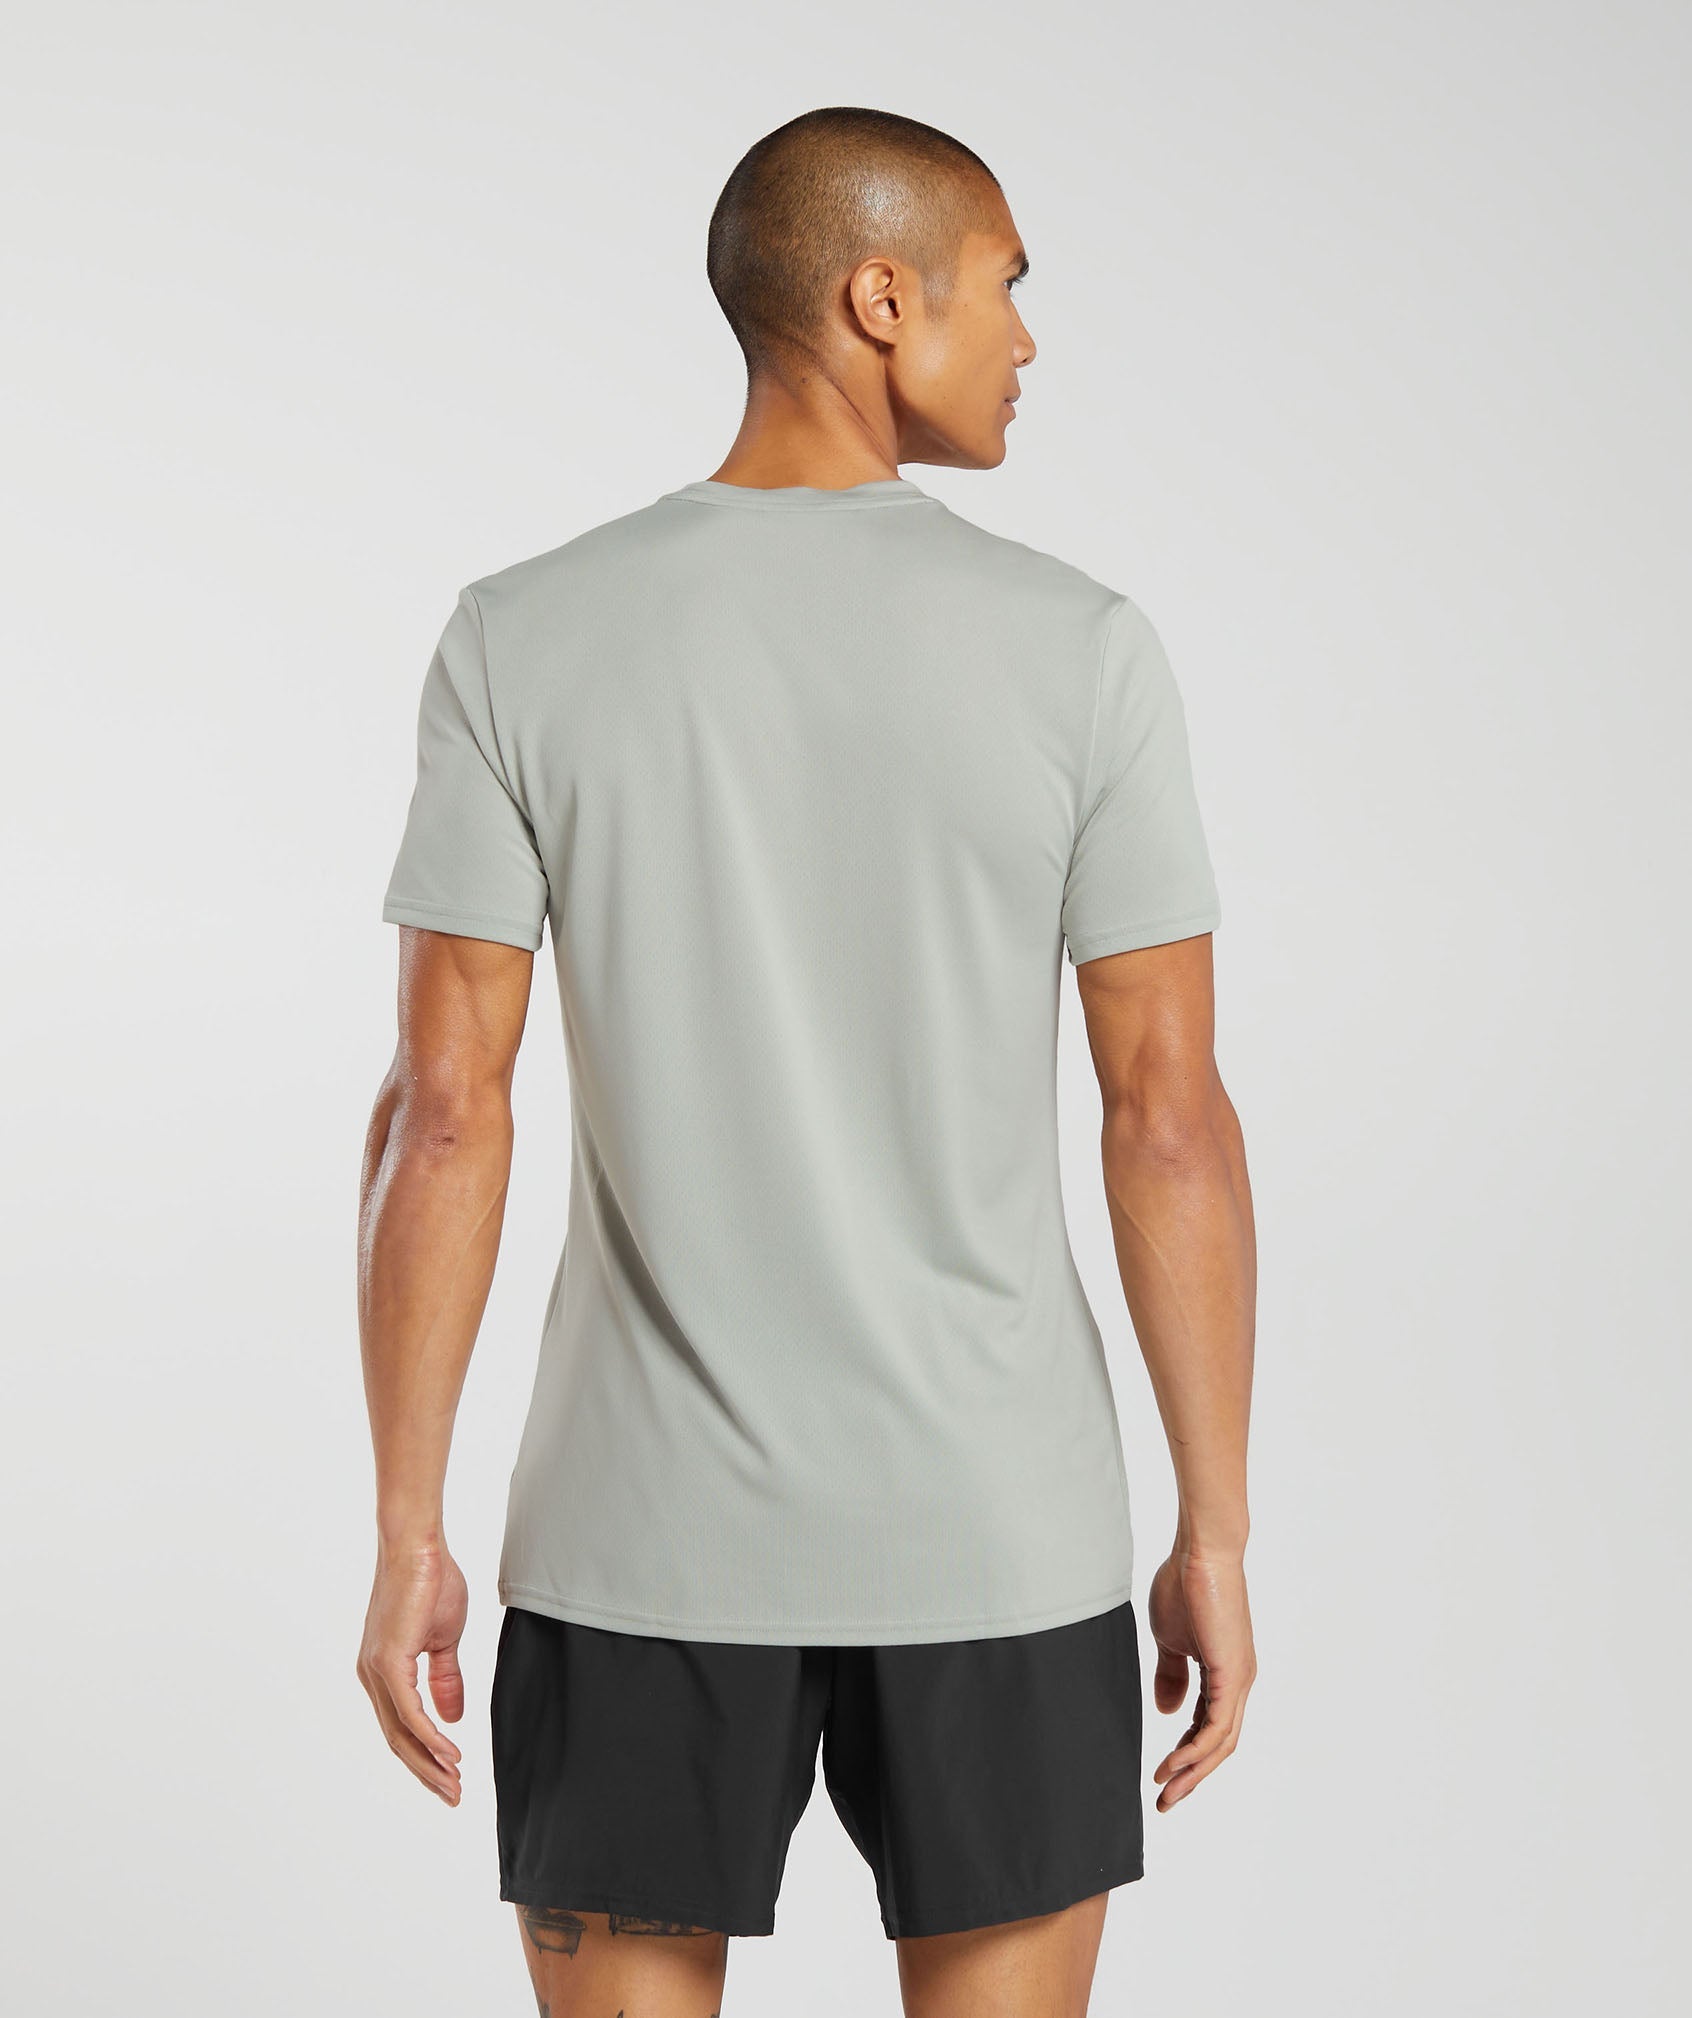 Arrival T-Shirt in Stone Grey - view 2